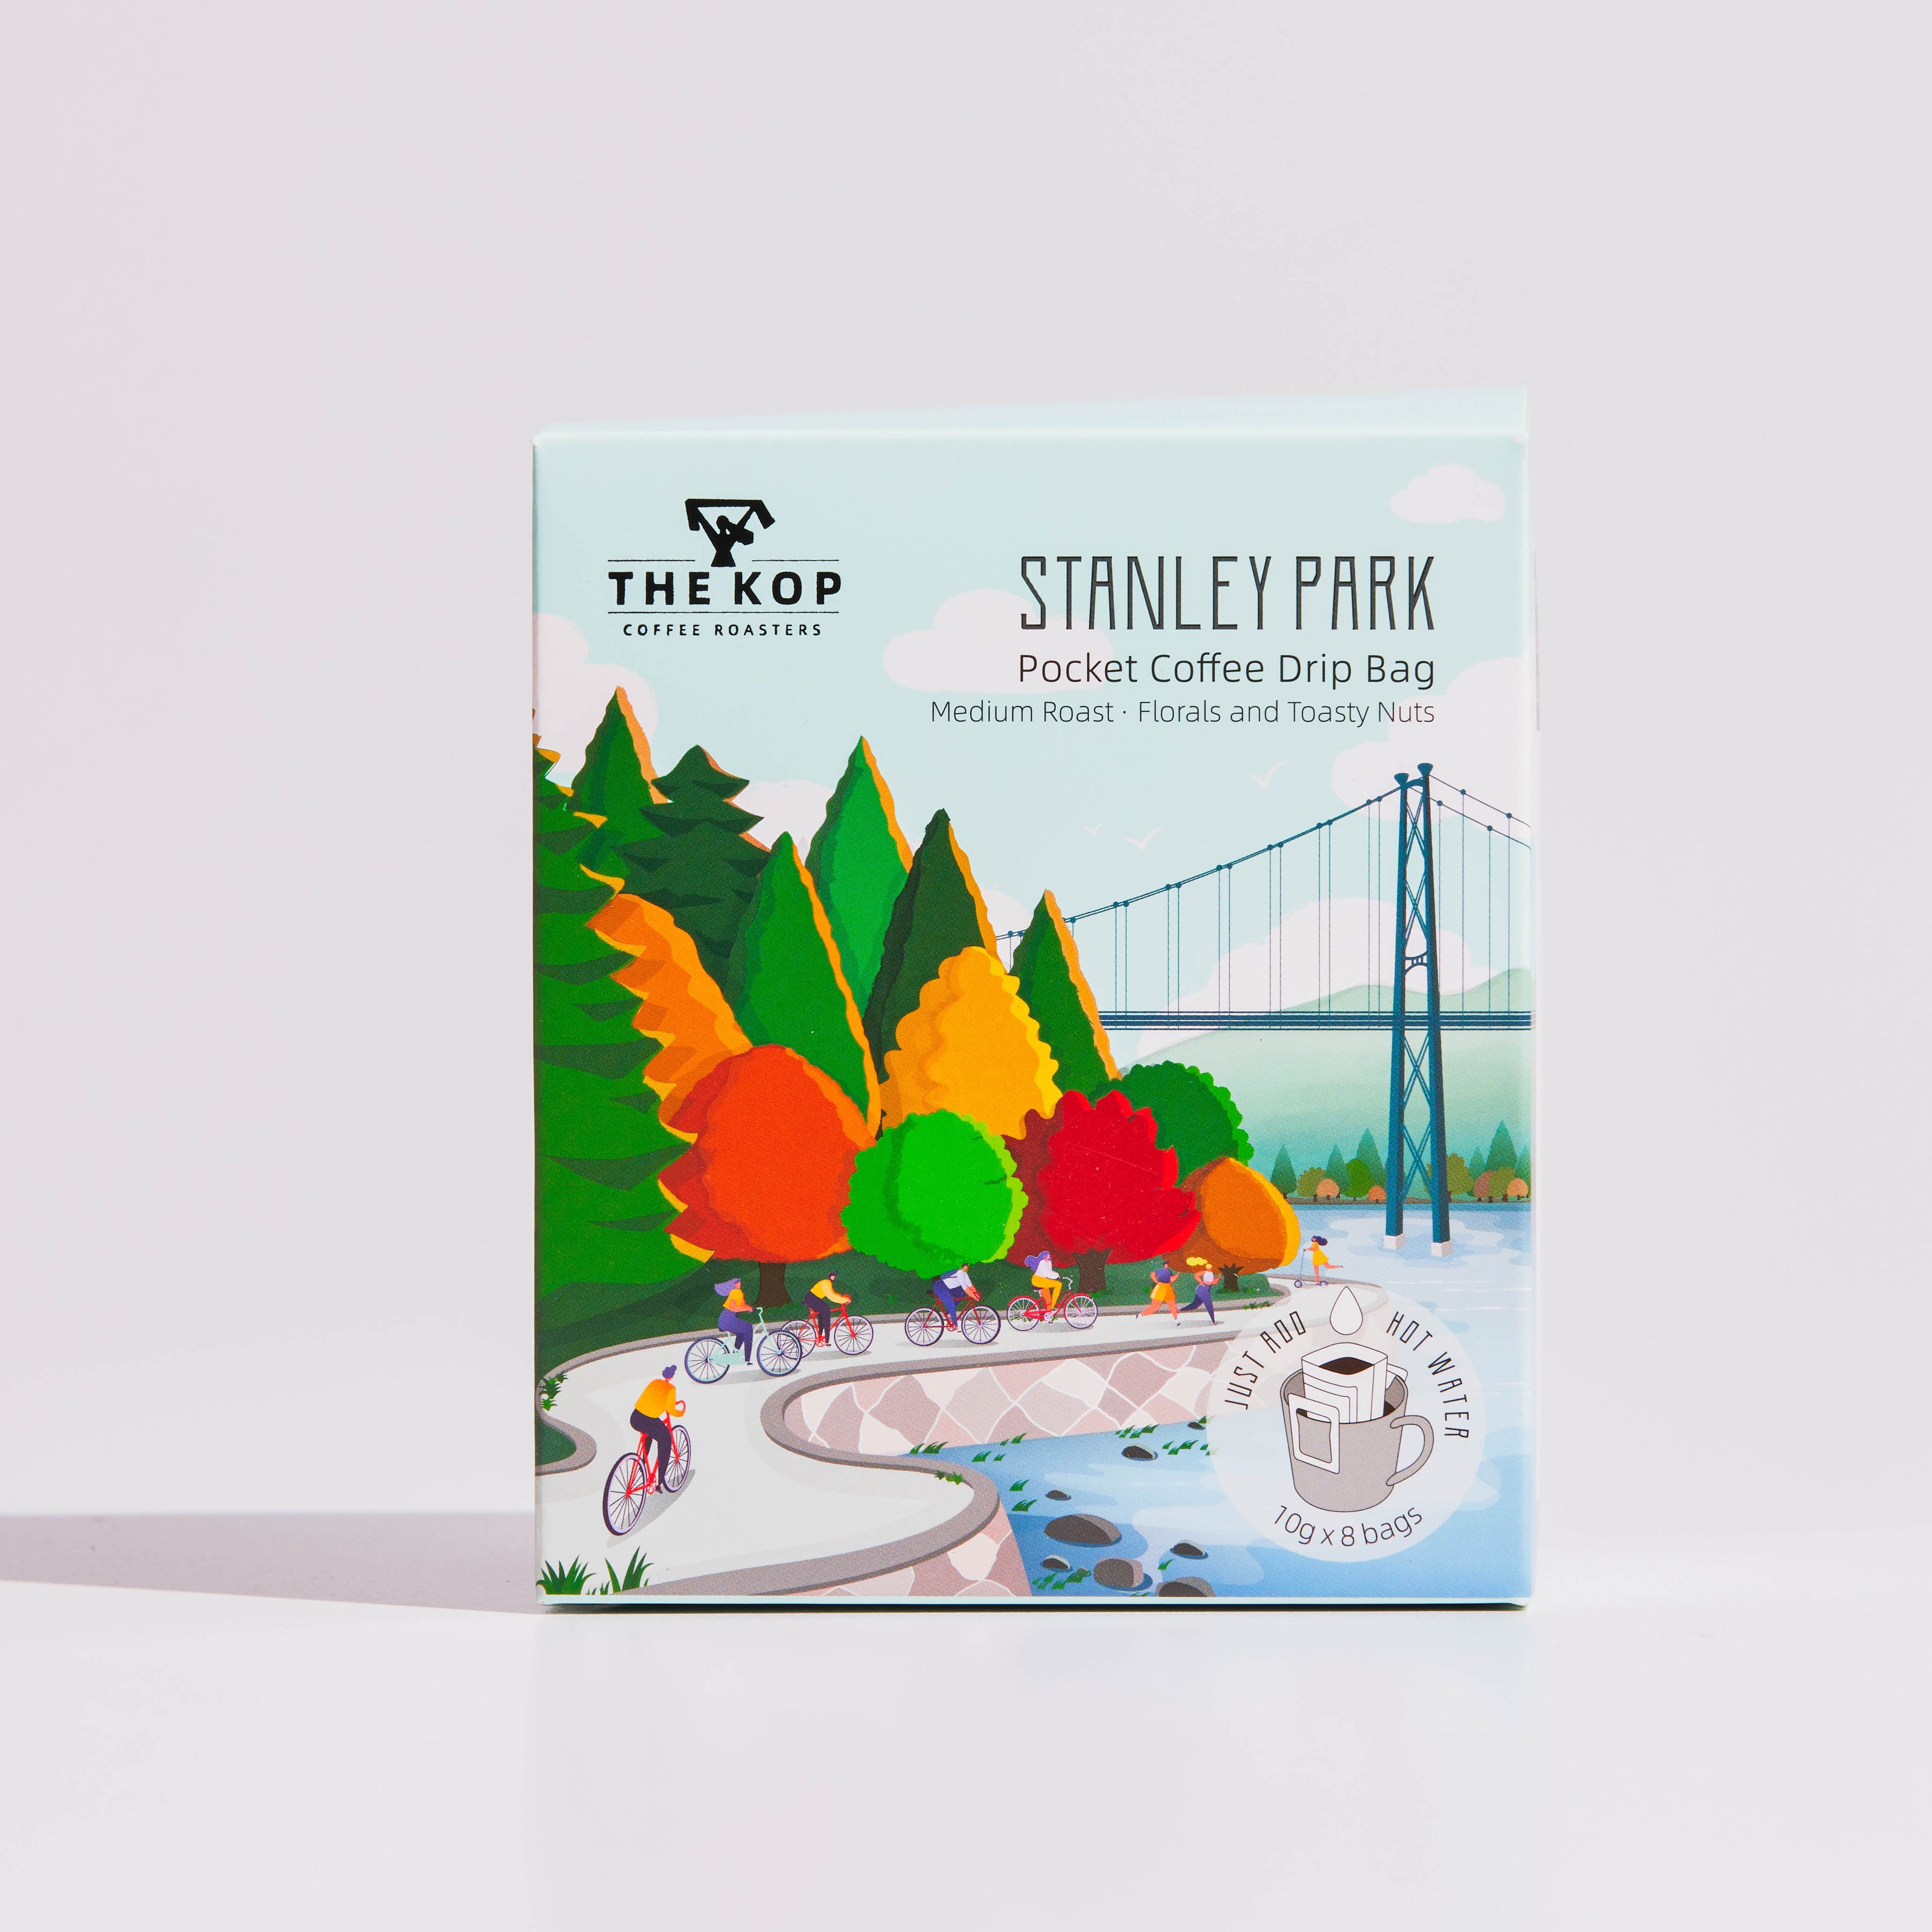 A pack of 8 single-serve coffee drip bags, each containing 10g of medium-roasted coffee ground. Originating from South America and Africa, with flavour notes of florals and toasty nuts. Individually sealed for freshness